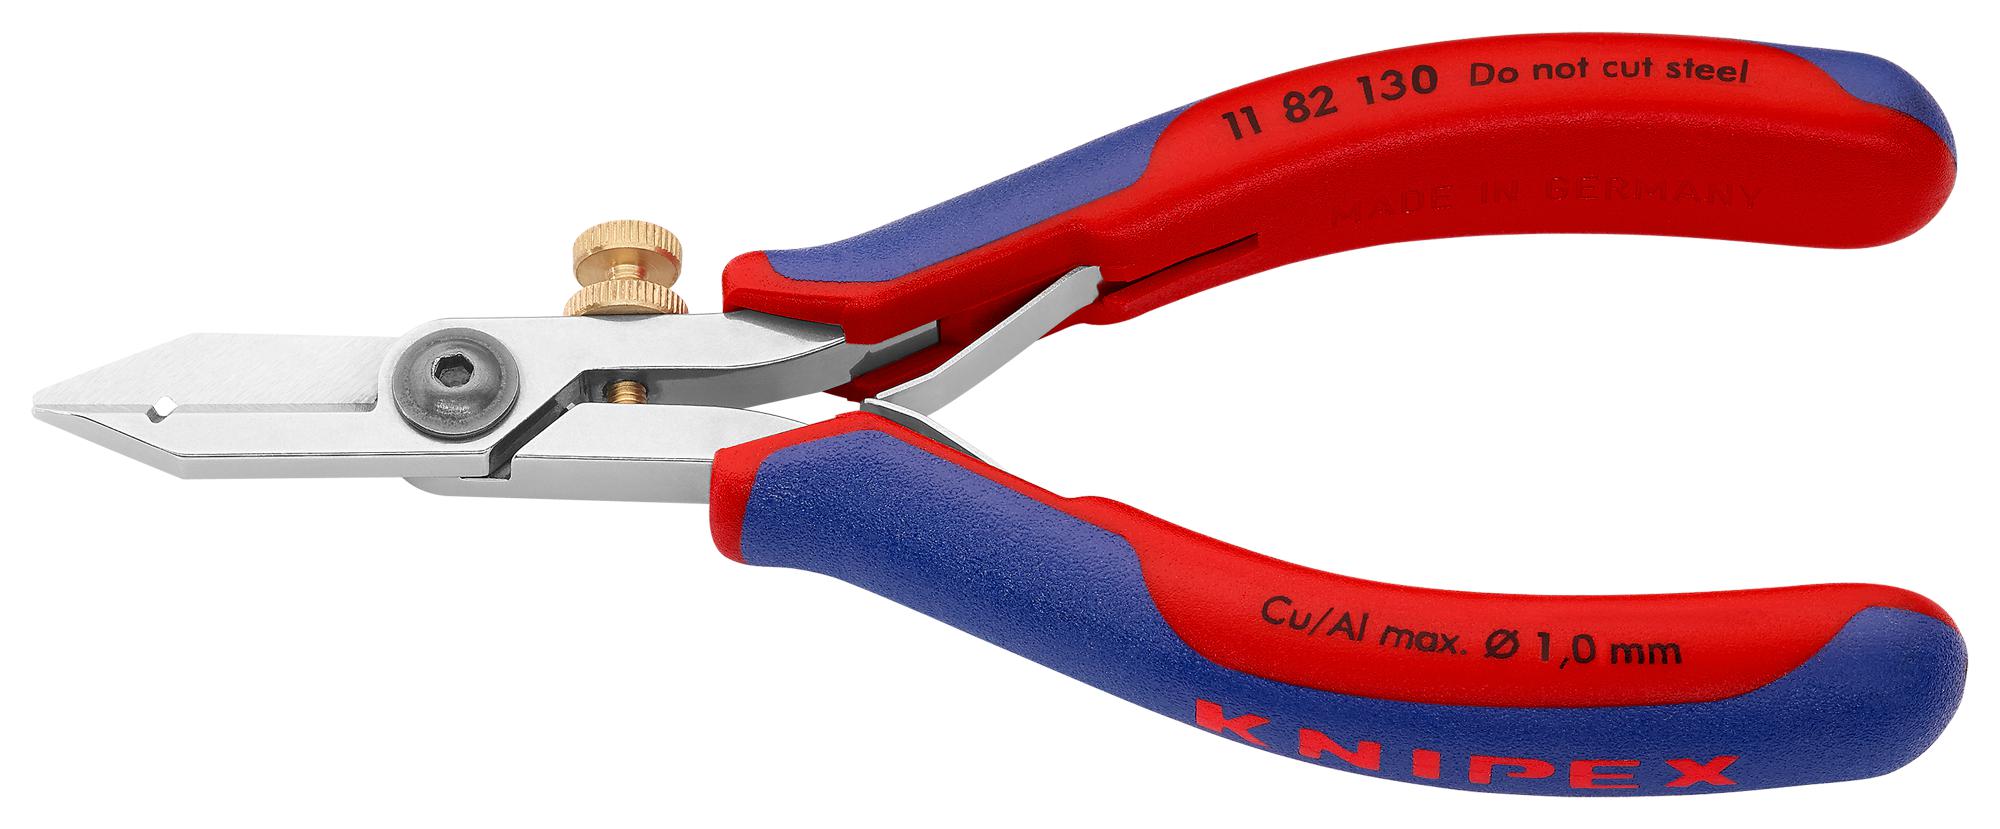 11 82 130 WIRE STRIPPER, ELECTRONIC KNIPEX